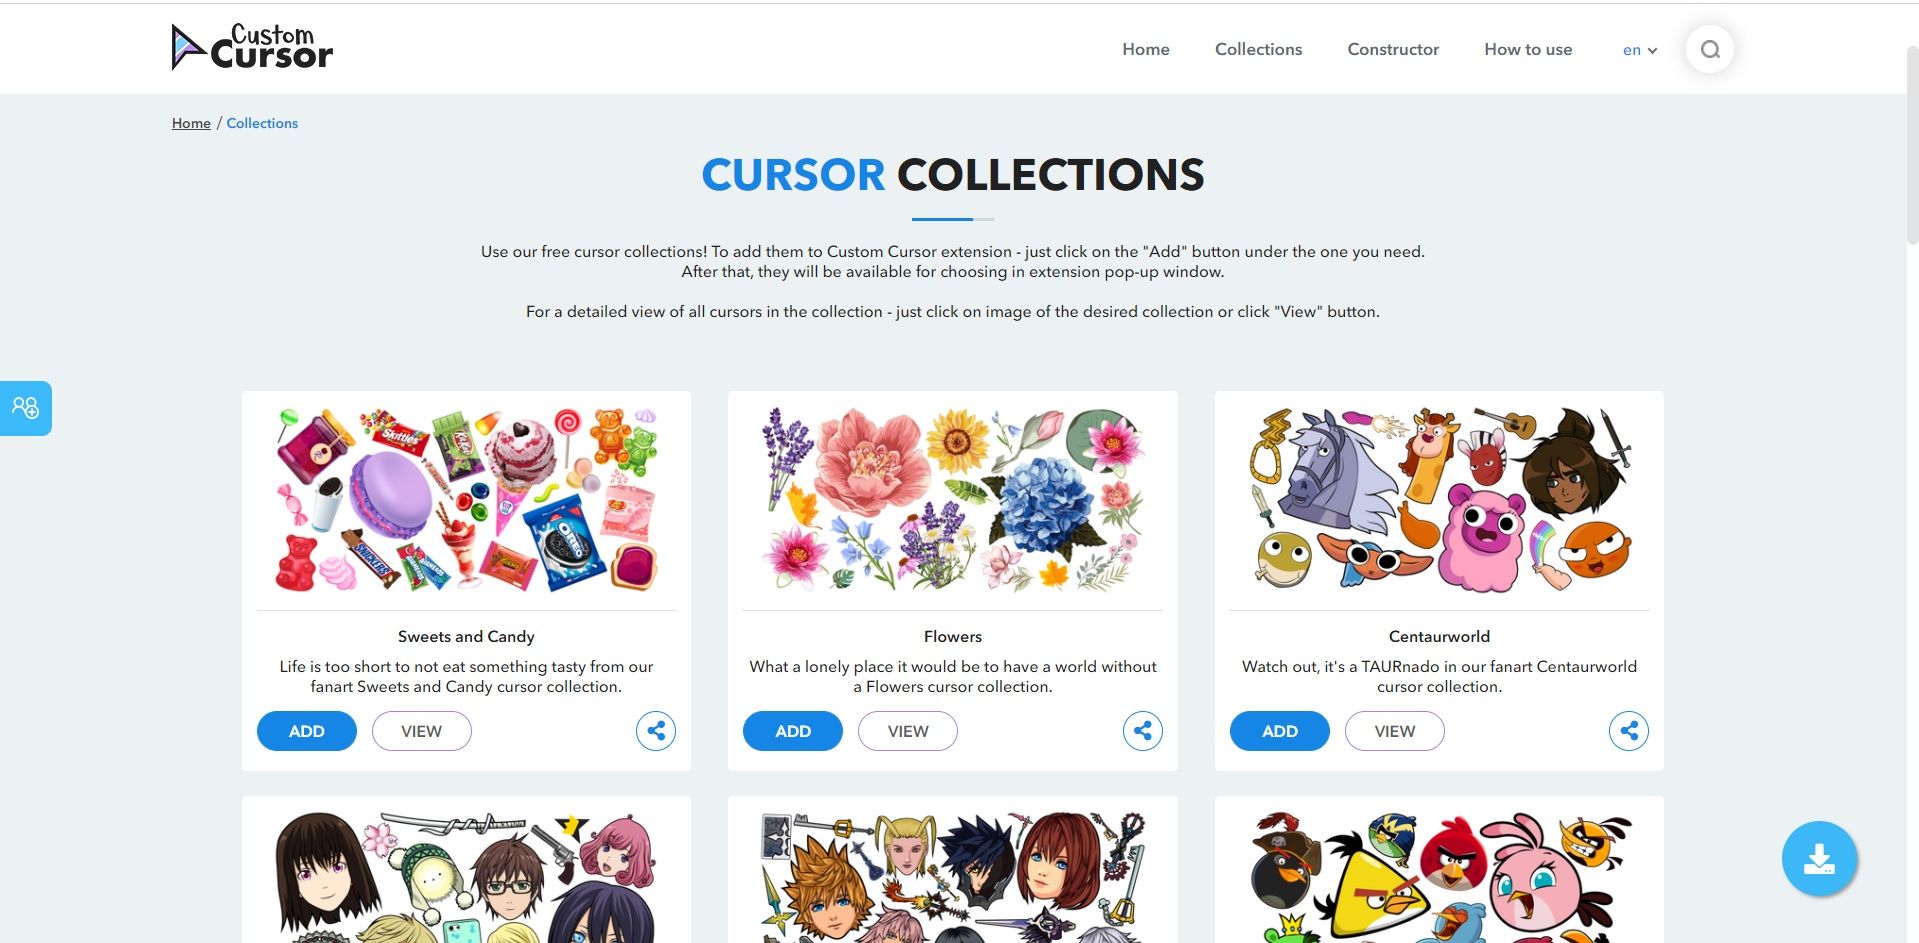 Custom Cursor collections page